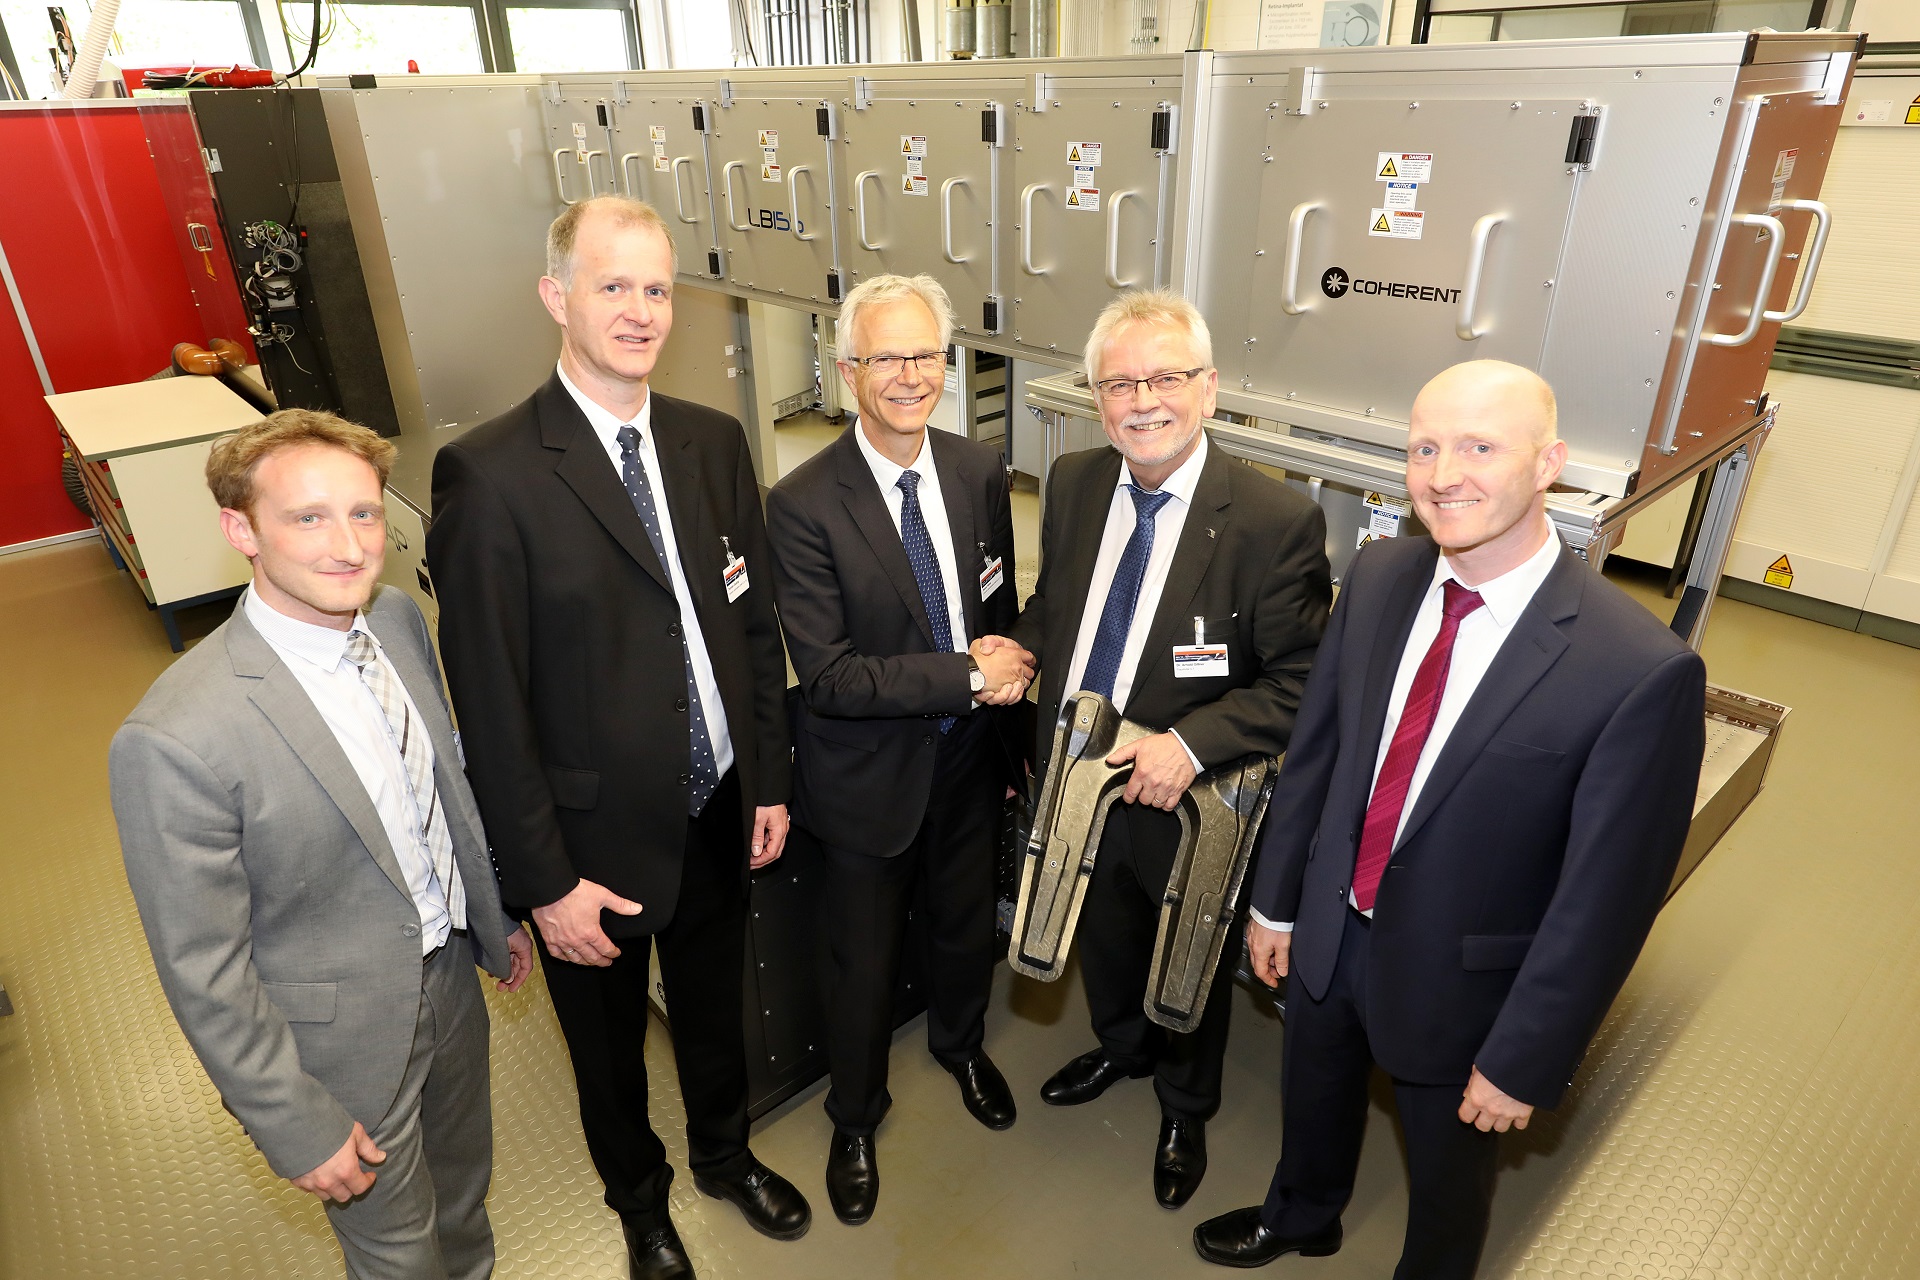 Handover of the Coherent system LineBeam 155 to Fraunhofer ILT. Looking forward to joint research projects, from left to right: Christian Hördemann (Fraunhofer ILT), Thorsten Geuking (Coherent), Rainer Pätzel (Coherent), Dr. Arnold Gillner (Fraunhofer ILT) and Dr. Ralph Delmdahl (Coherent).